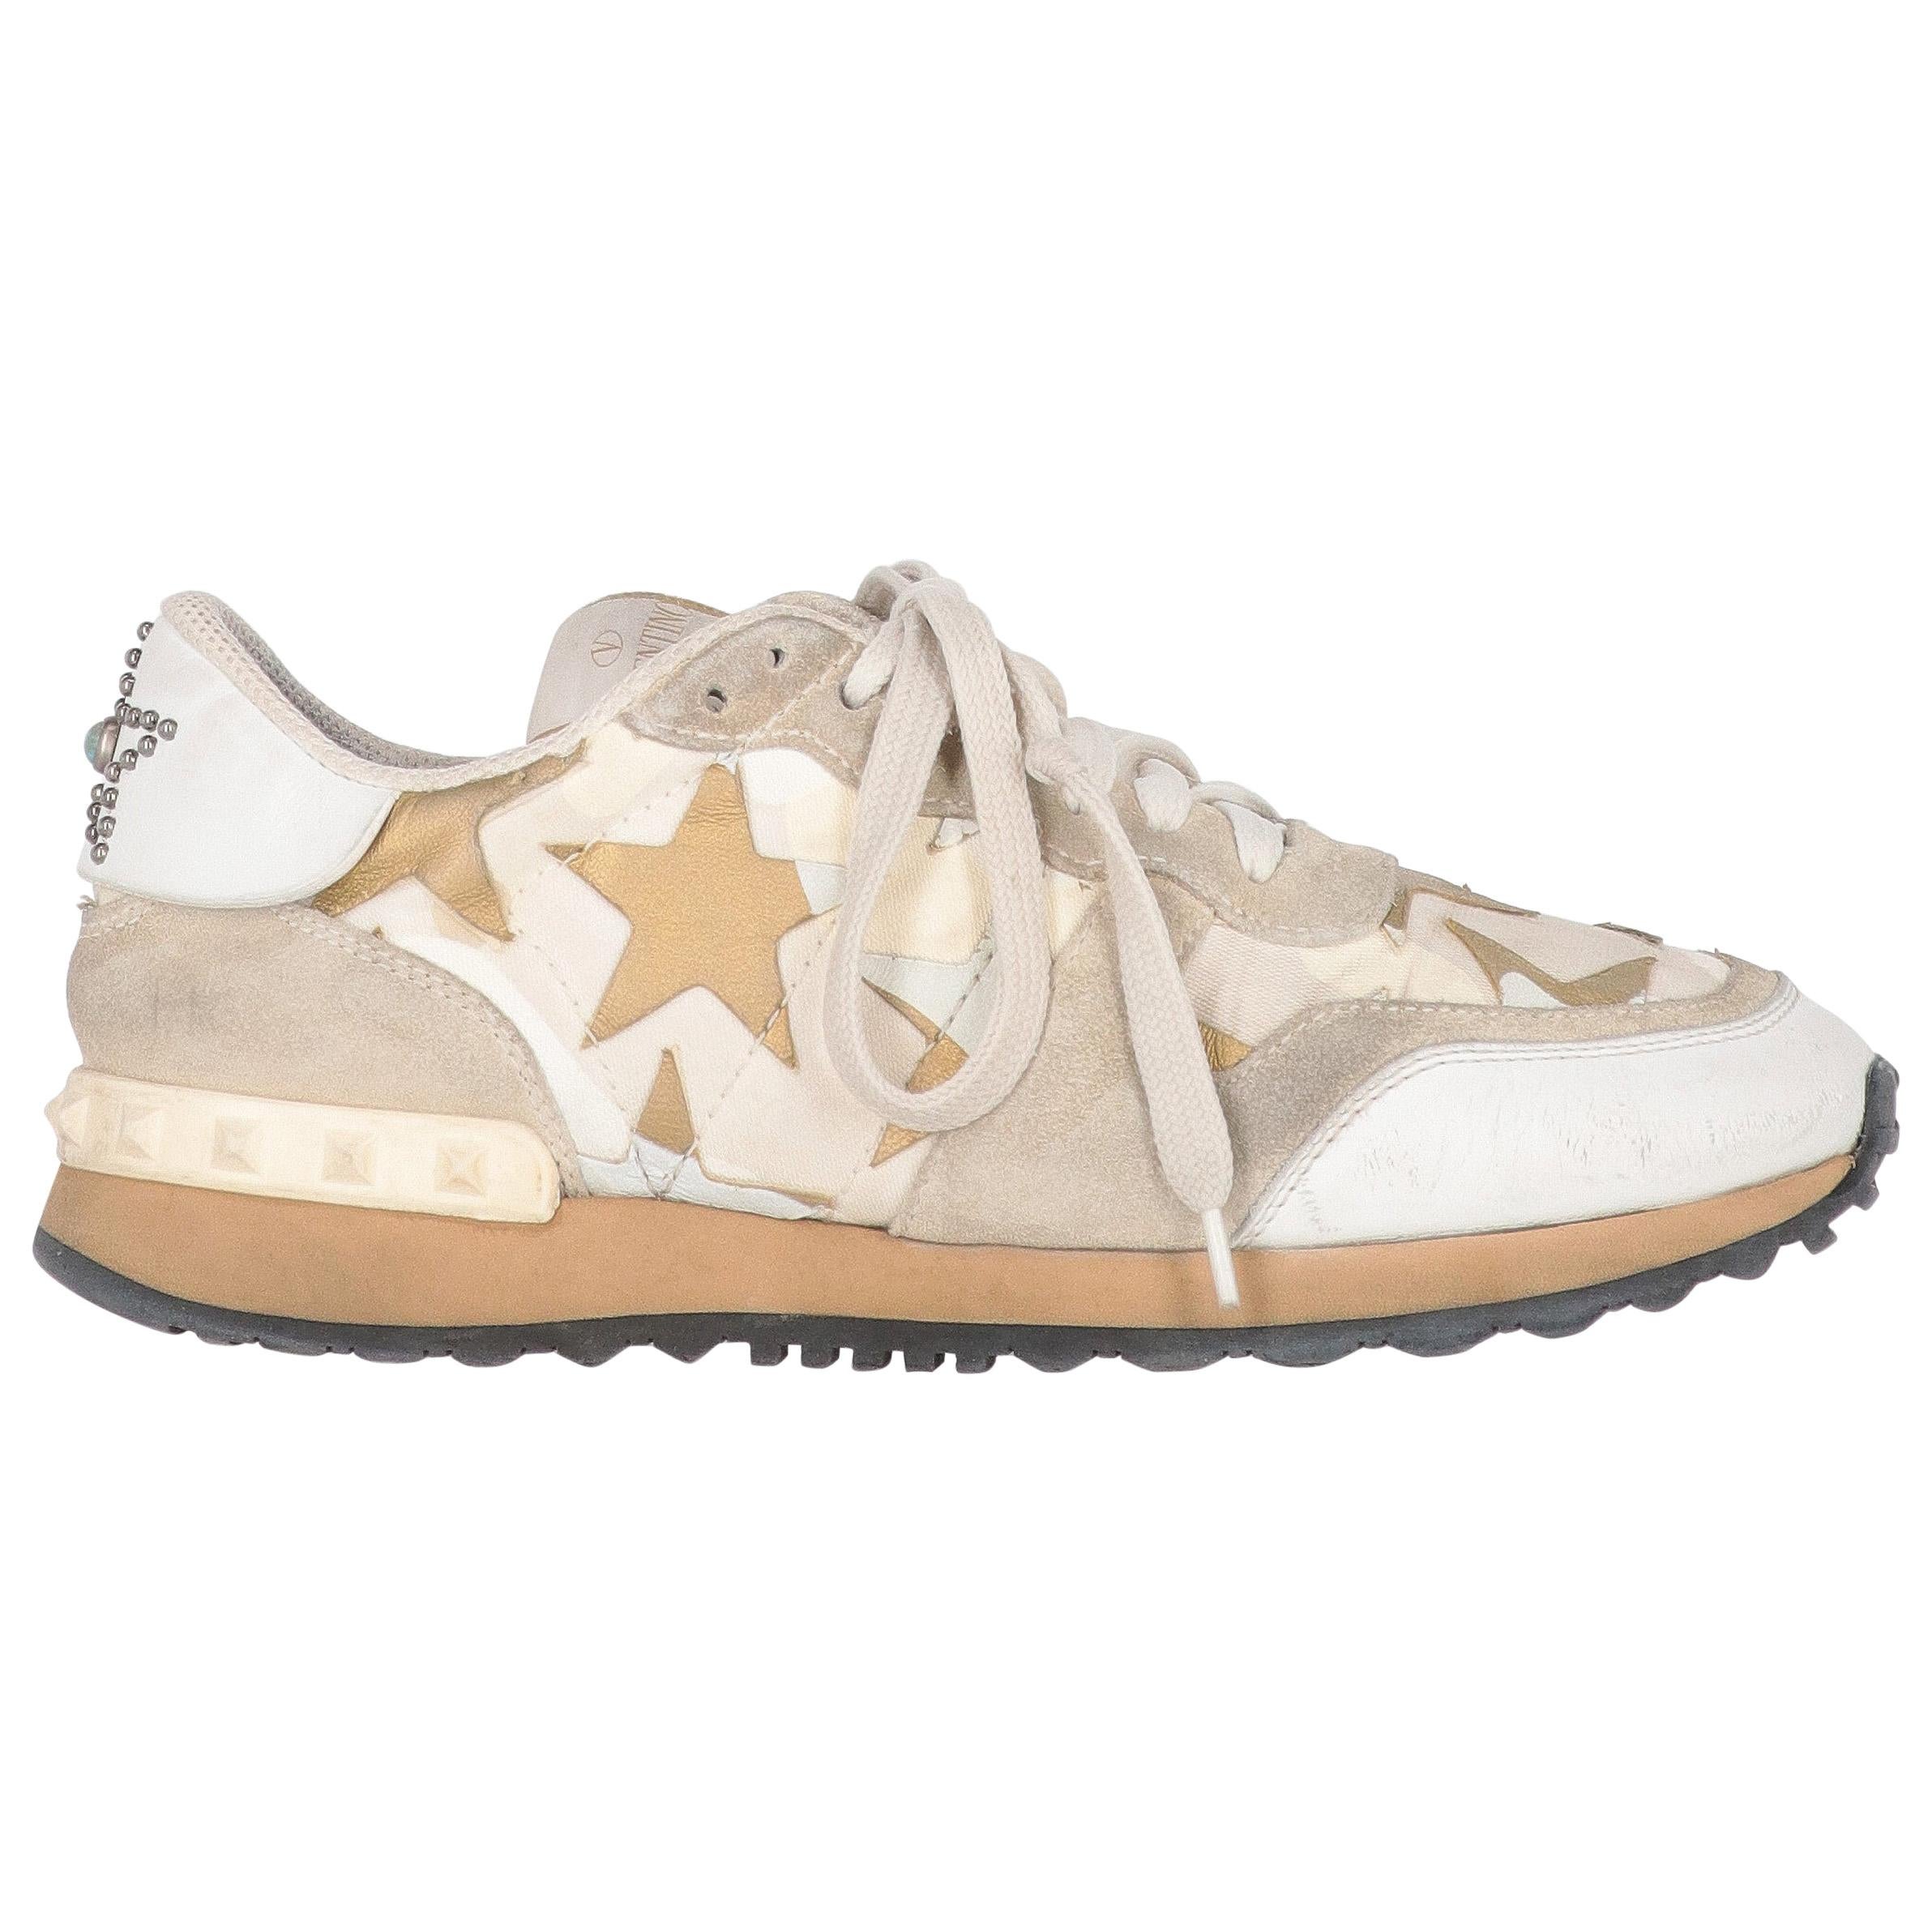 2010s Valentino Camouflage Rockrunner Sneakers For Sale